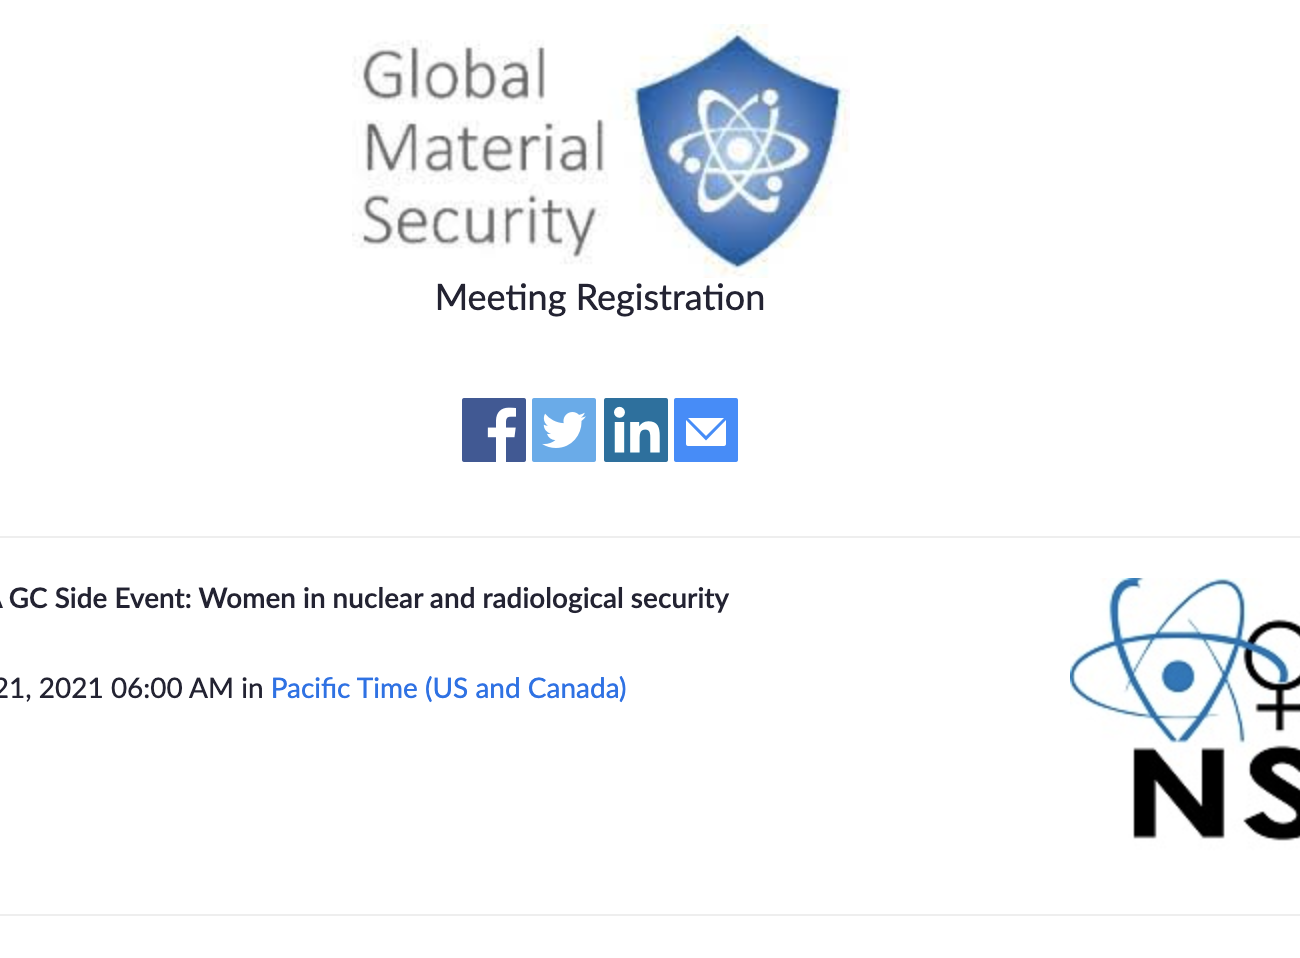 Side Event on Women’s Experiences in Nuclear and Radiological Security at the IAEA’s General Conference